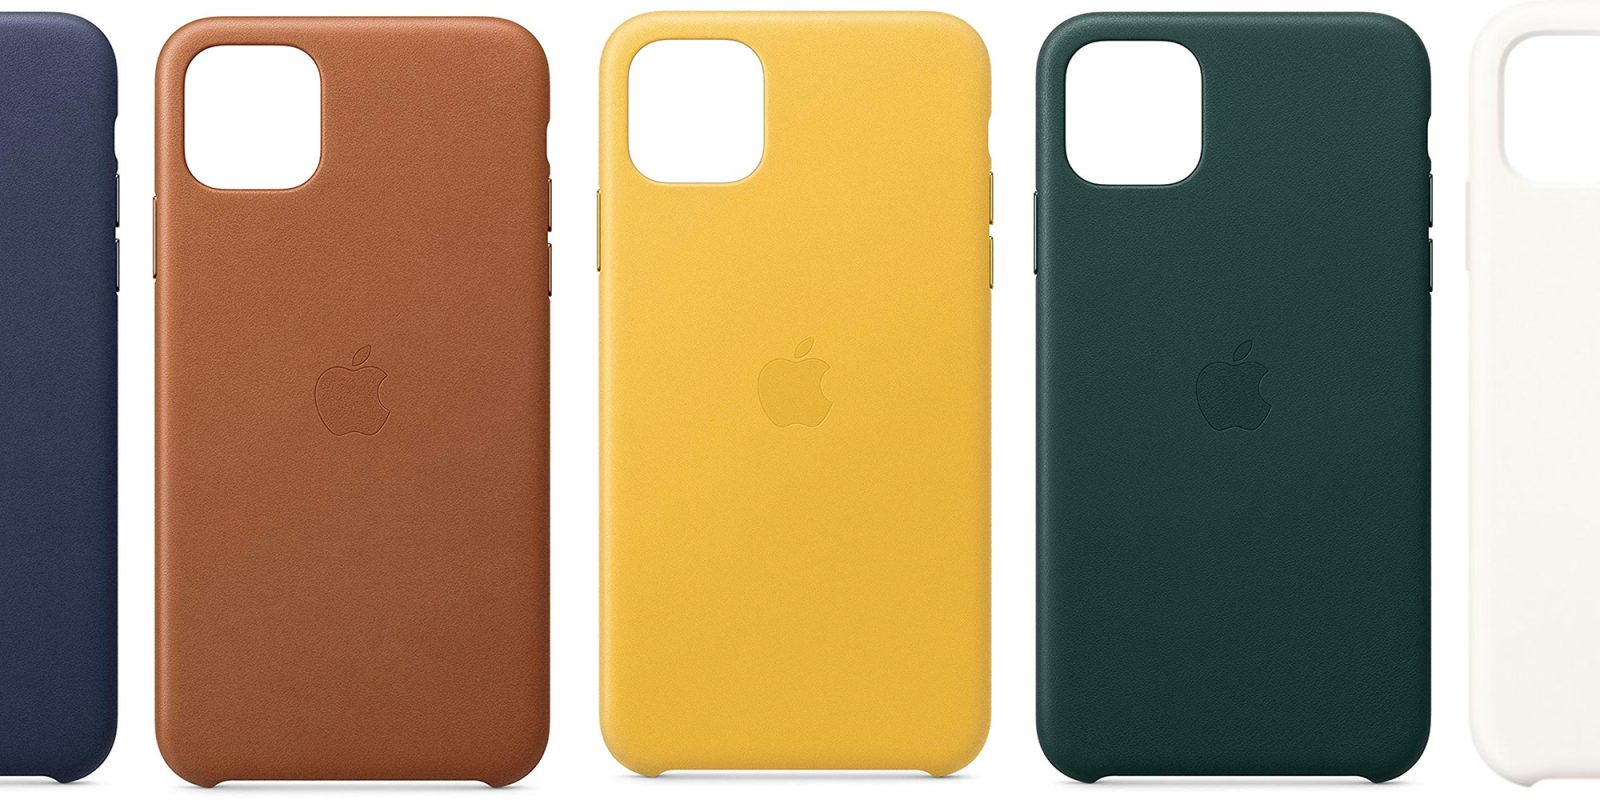 Apple&#39;s official iPhone 11 and Pro/Max cases on sale from $24 (Reg. up to $49) - 9to5Toys